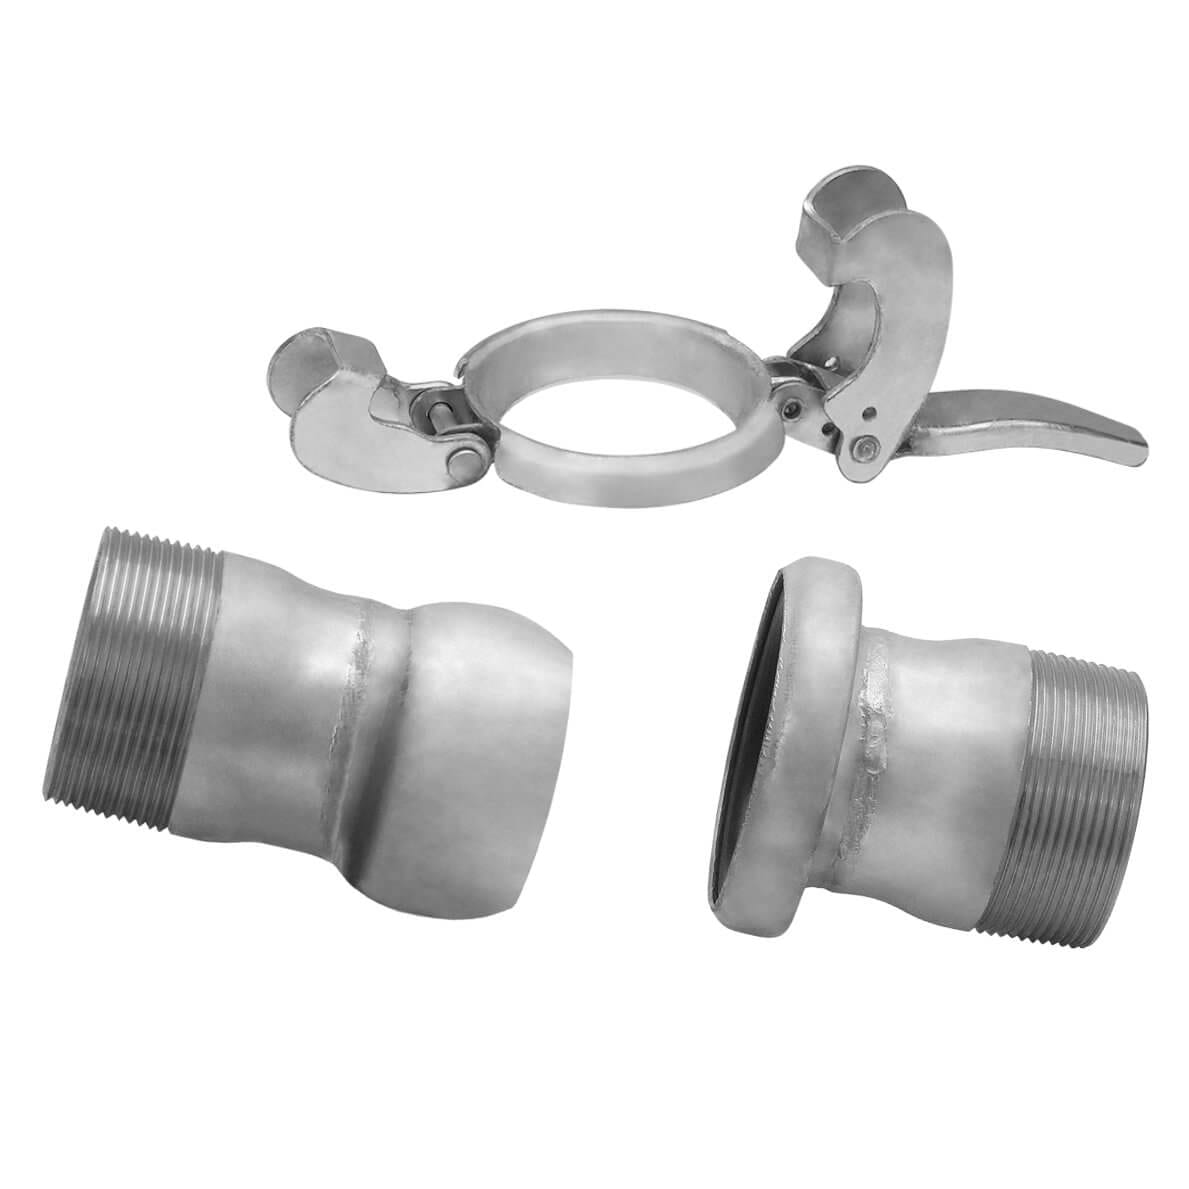 Female Closure Ring or Set 6" Bauer Type Lever Lock Coupling for 6" Hose Male 